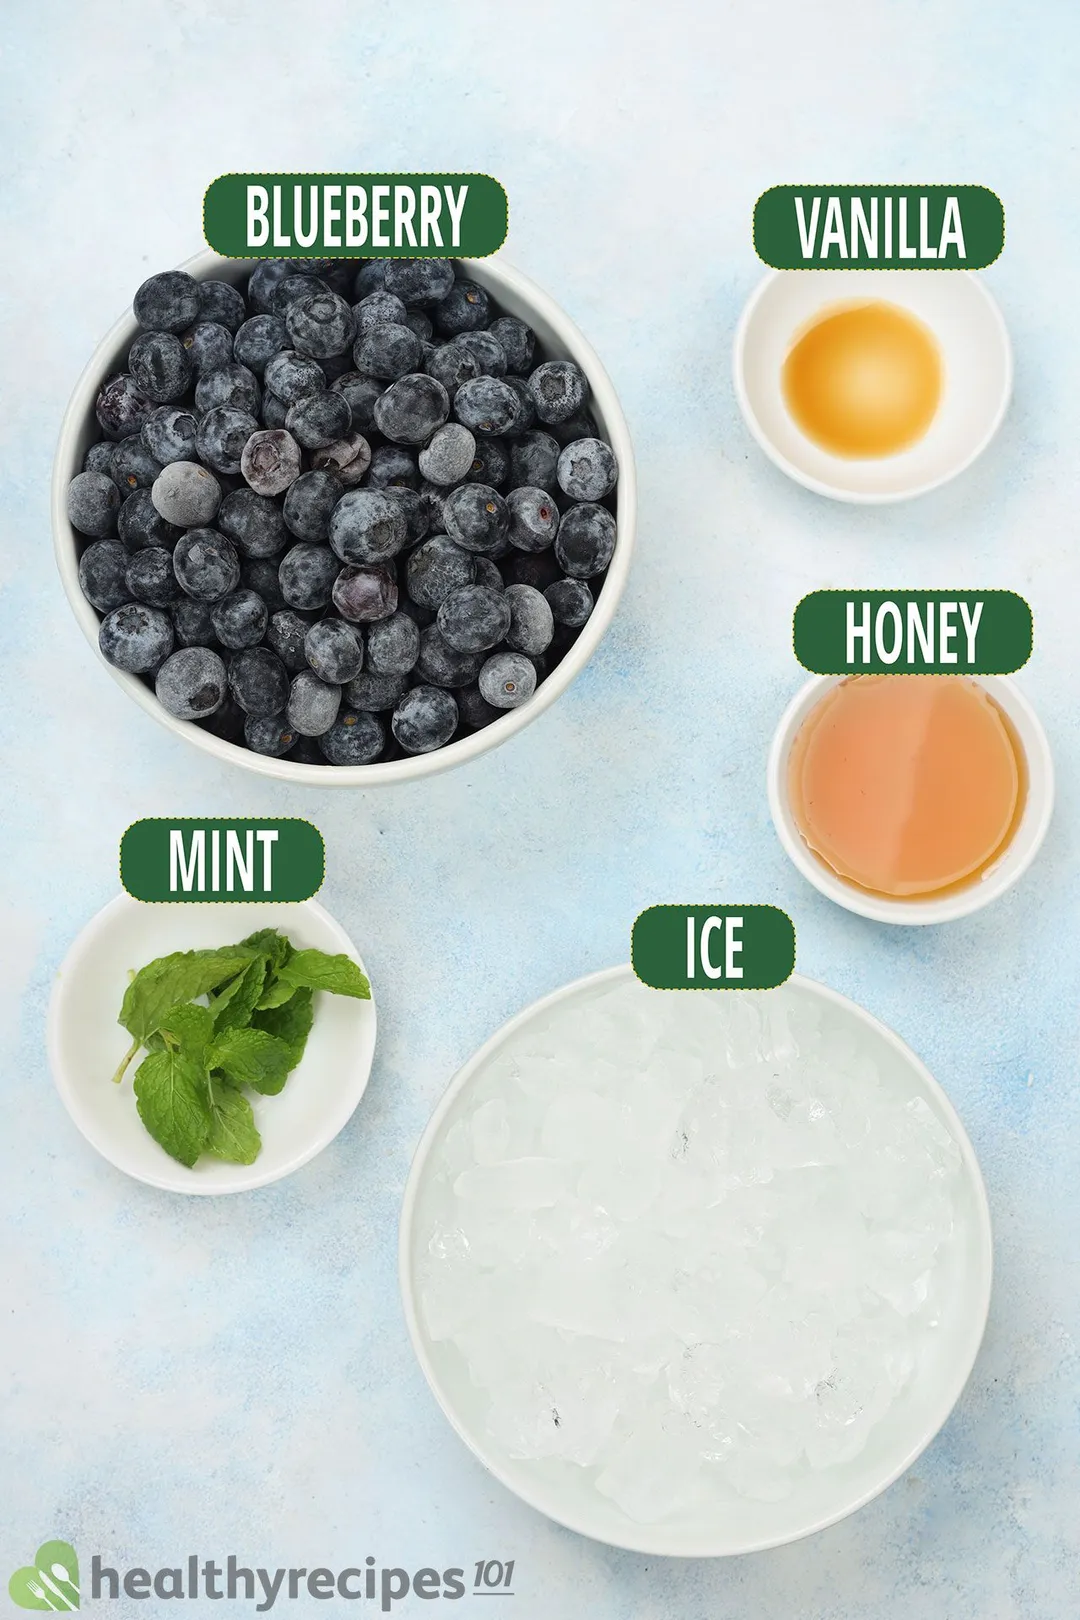 Bowls of blueberry, ice, honey, mint leaves, and vanilla